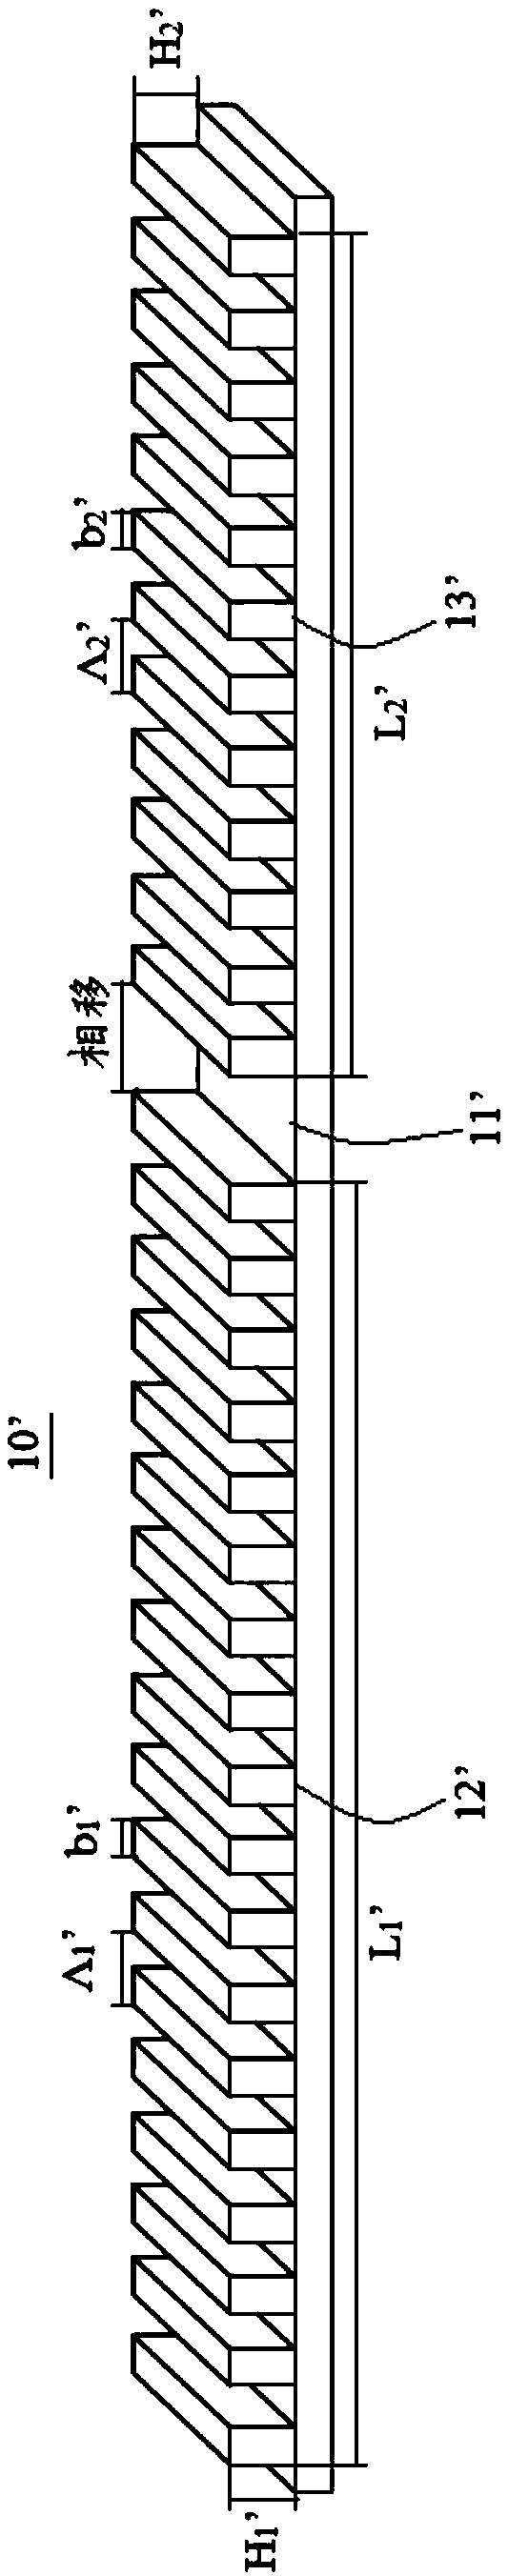 Asymmetrically-structured phase-shifting grating and DFB (distributed feedback) semiconductor laser